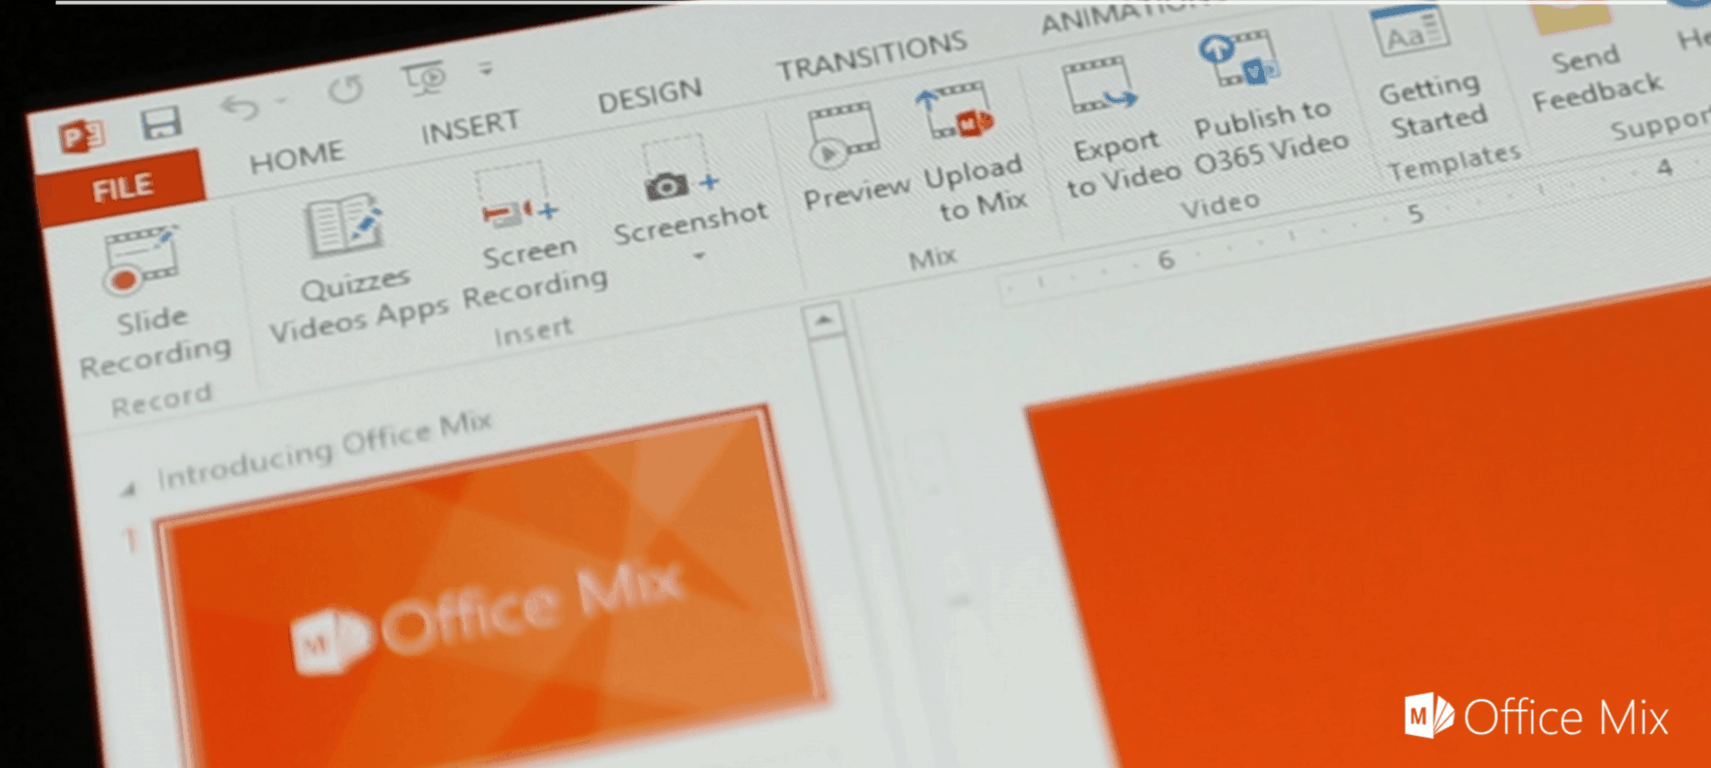 Office Mix to be retired next May, PowerPoint in Office 365 to gain many of its features - OnMSFT.com - October 23, 2017